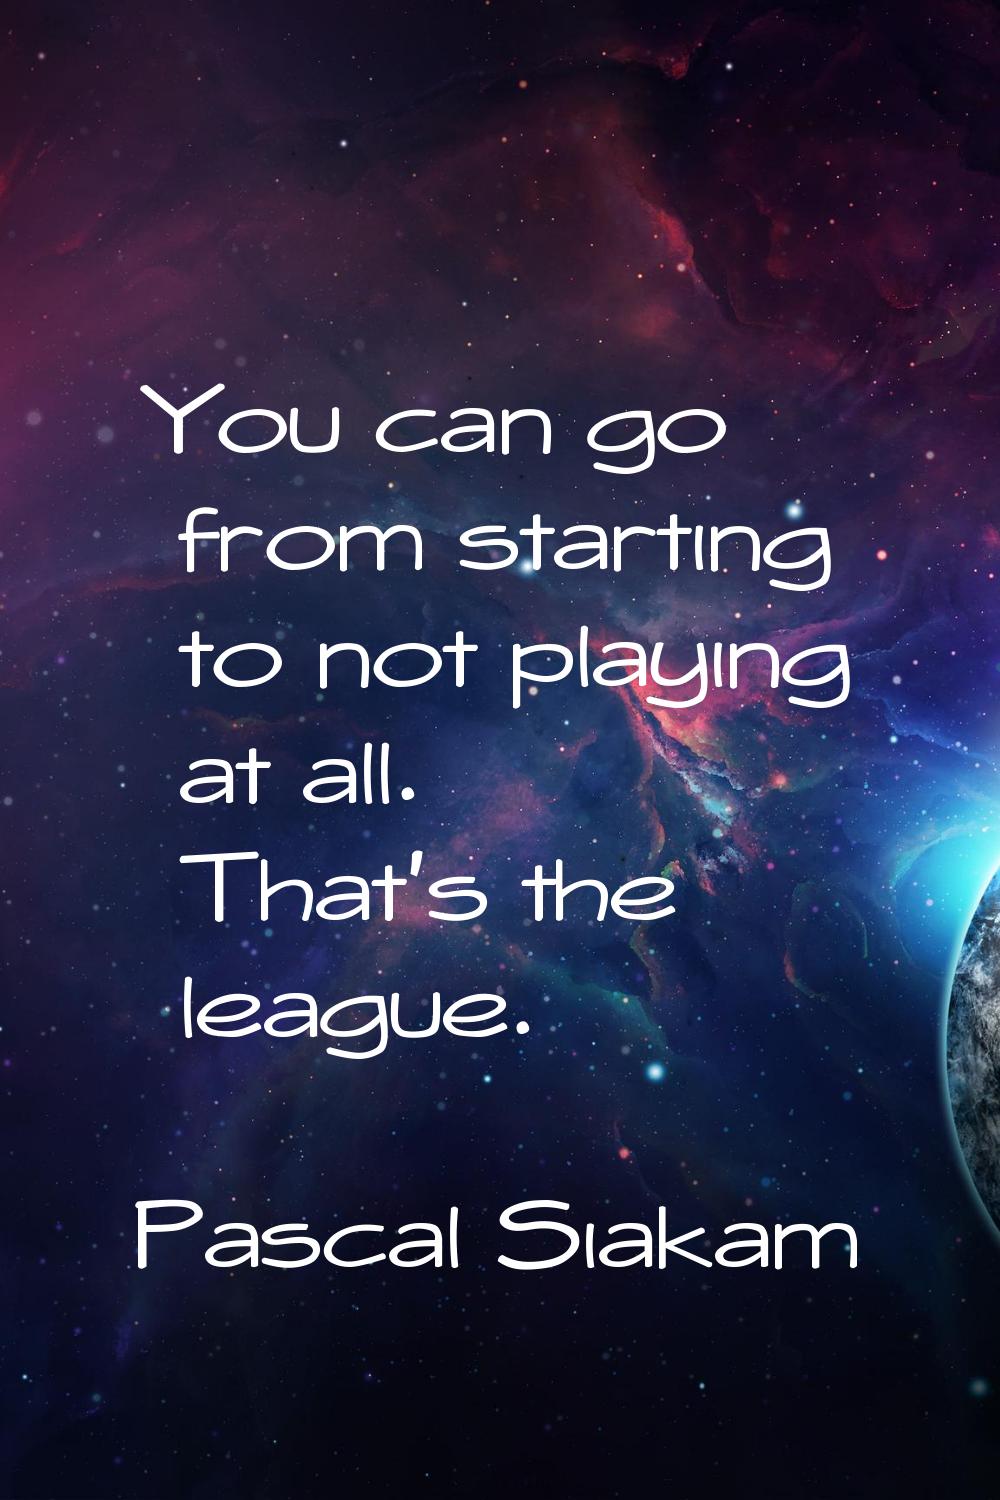 You can go from starting to not playing at all. That's the league.